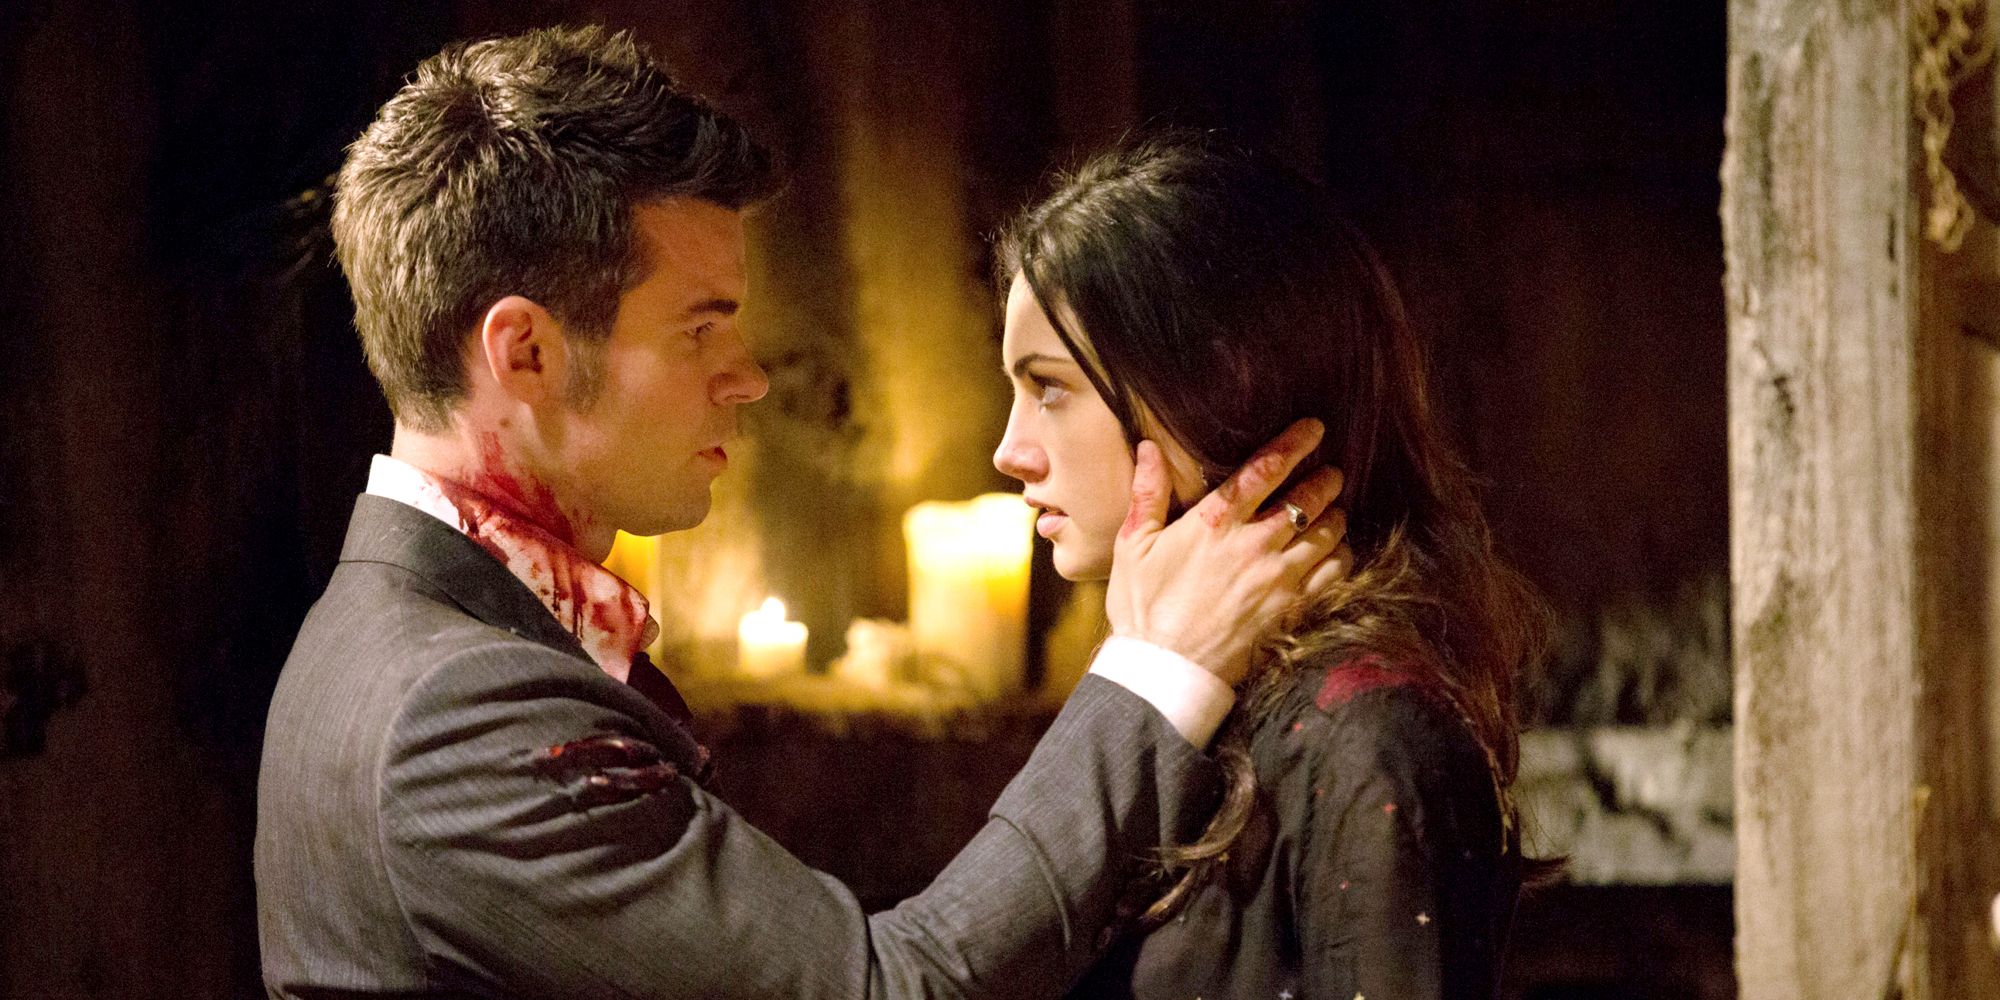 Image of Hayley and Elijah both bloody, he's touching her cheek gently.